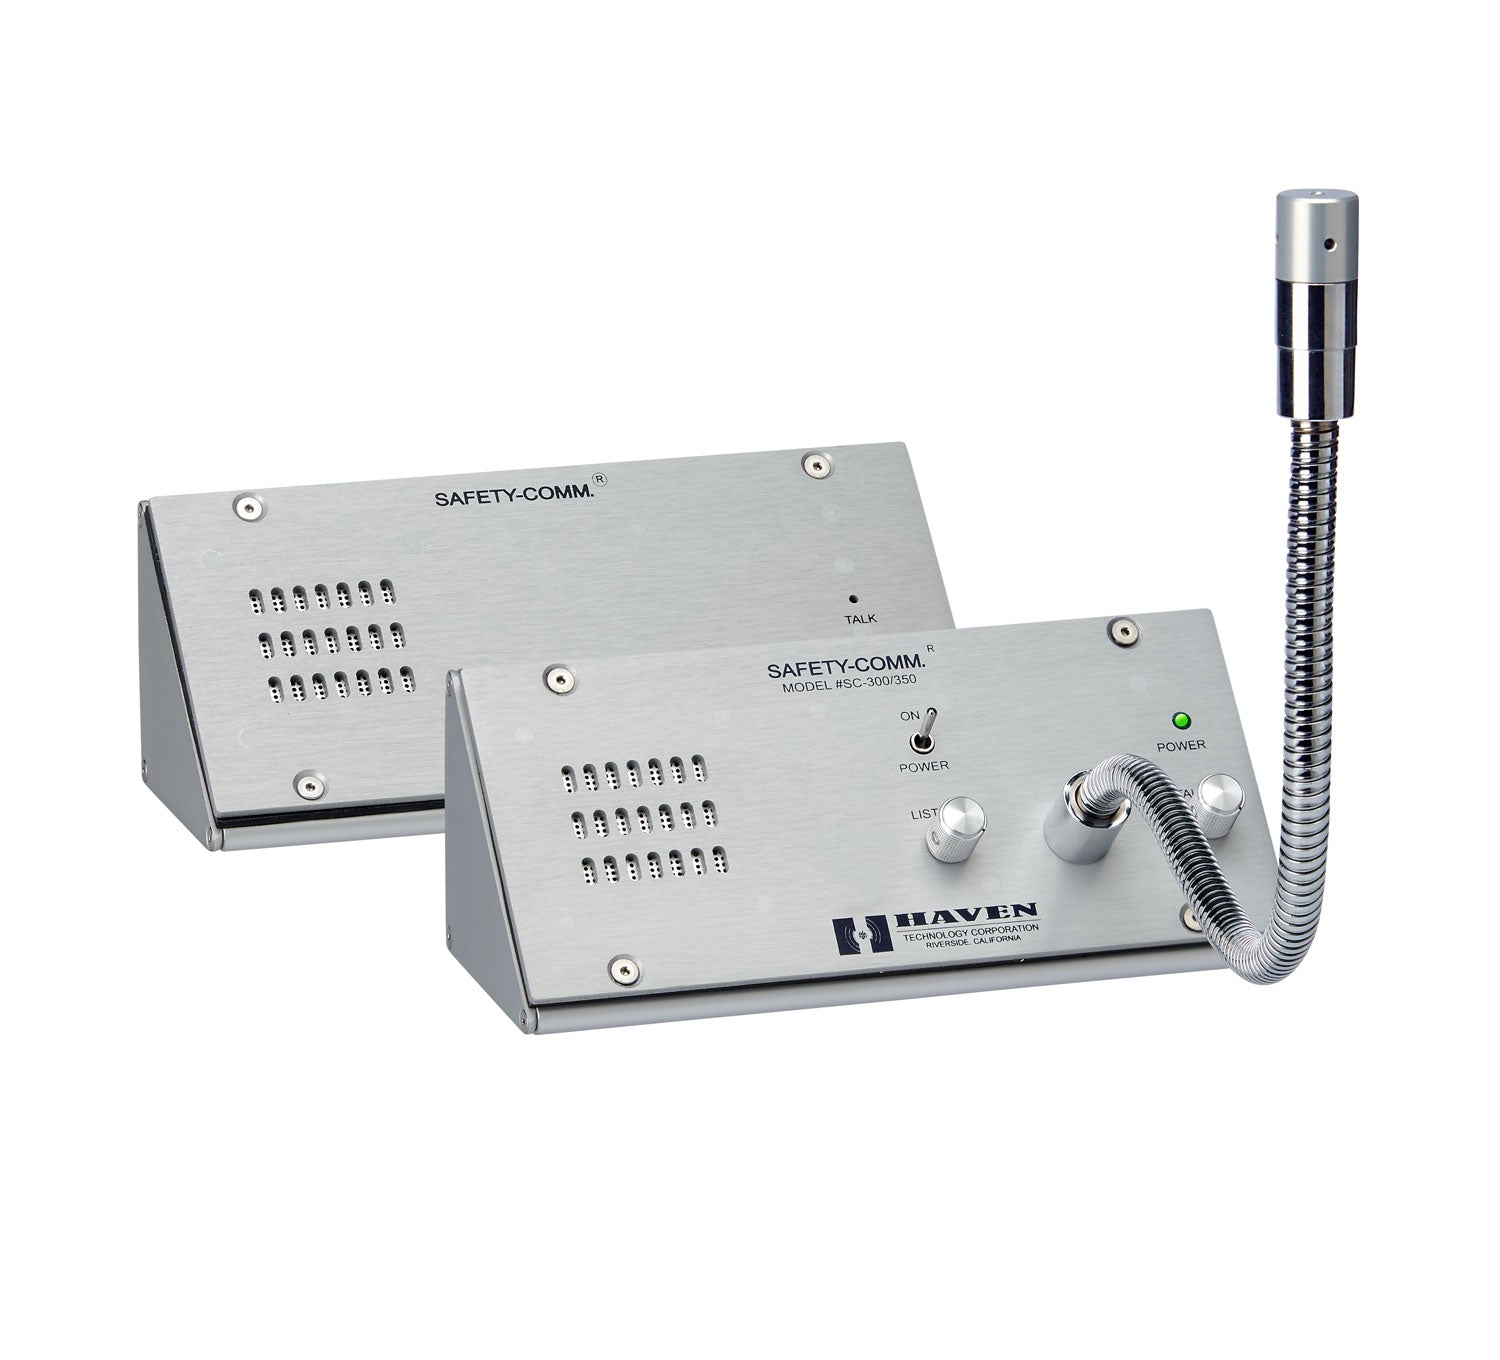 Safety-Comm SC-300 Counter Mounted Window Intercom. No window hole required.